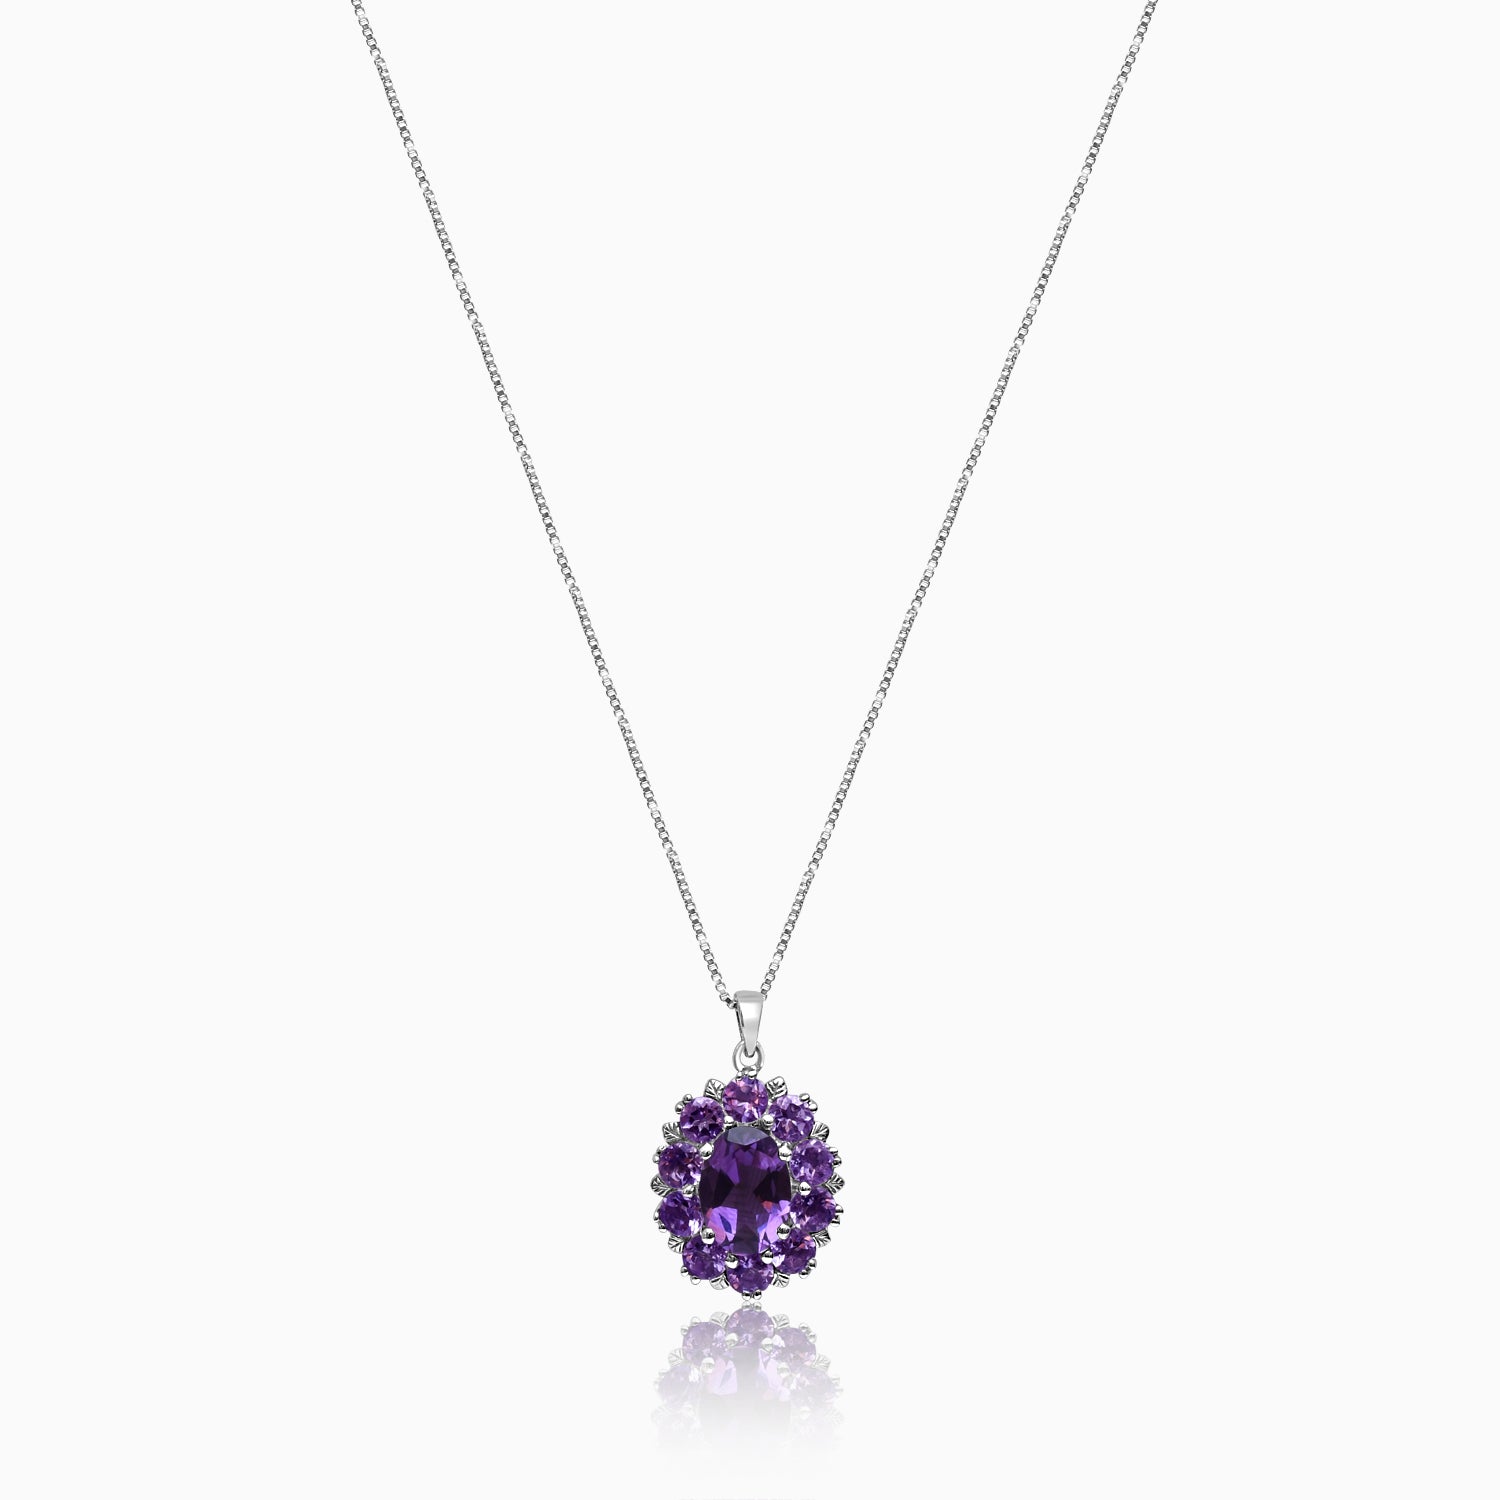 Silver Regal Floral Amethyst Pendant with Link Chain